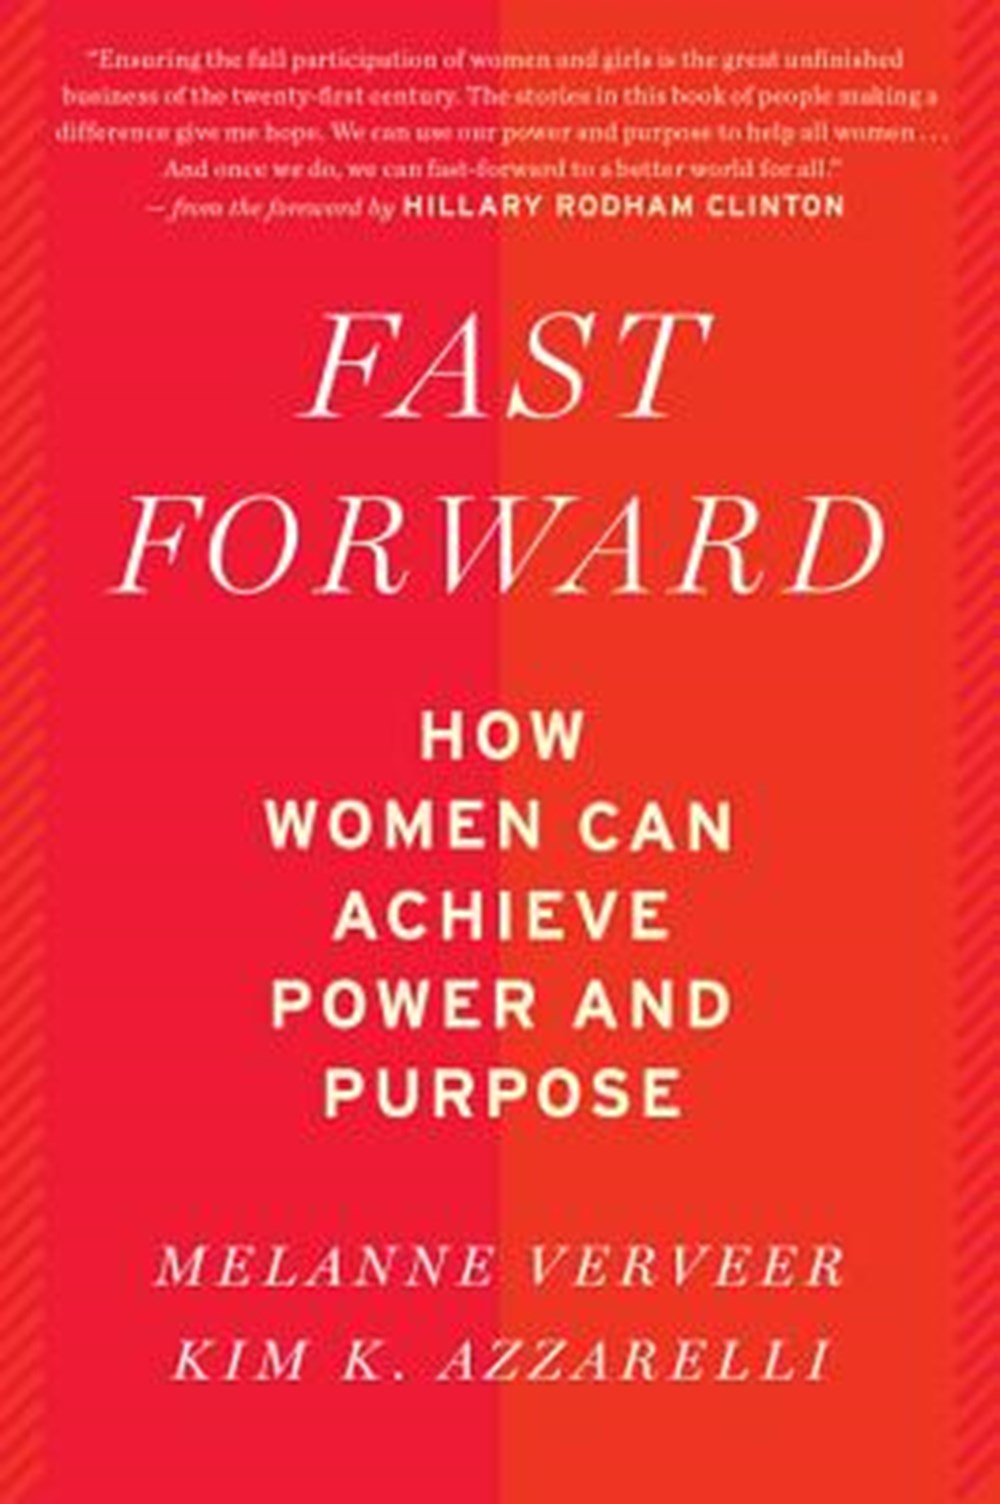 Fast Forward How Women Can Achieve Power and Purpose